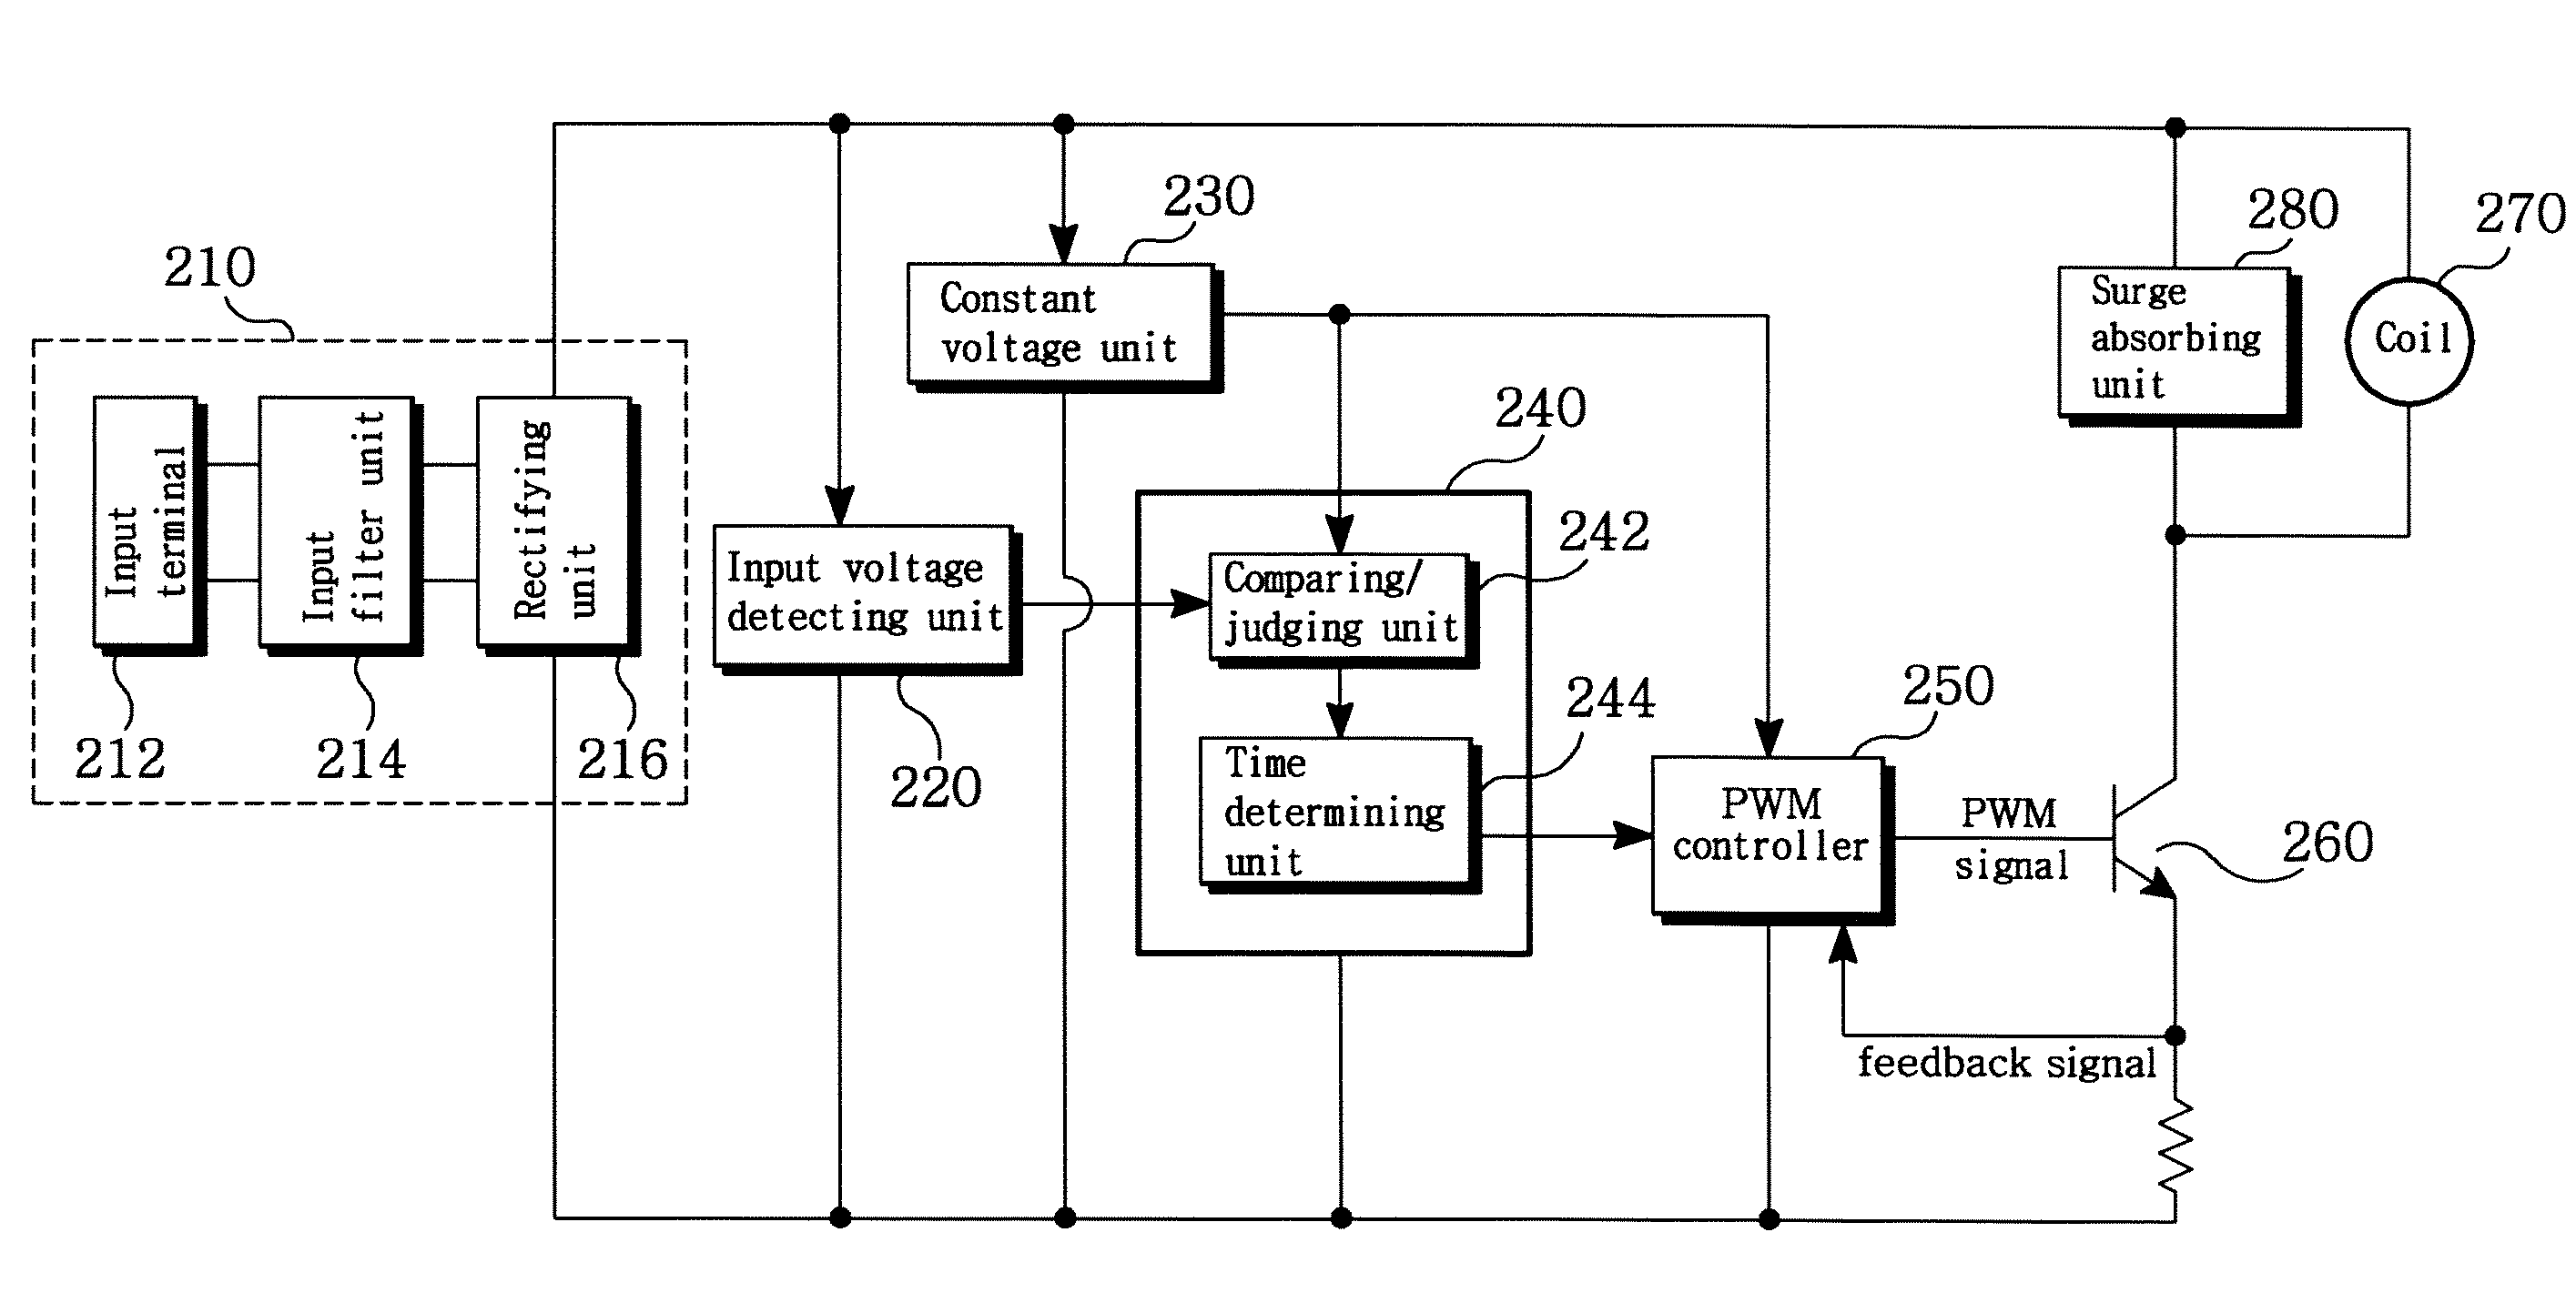 Coil-driving apparatus of electronic magnetic contactor